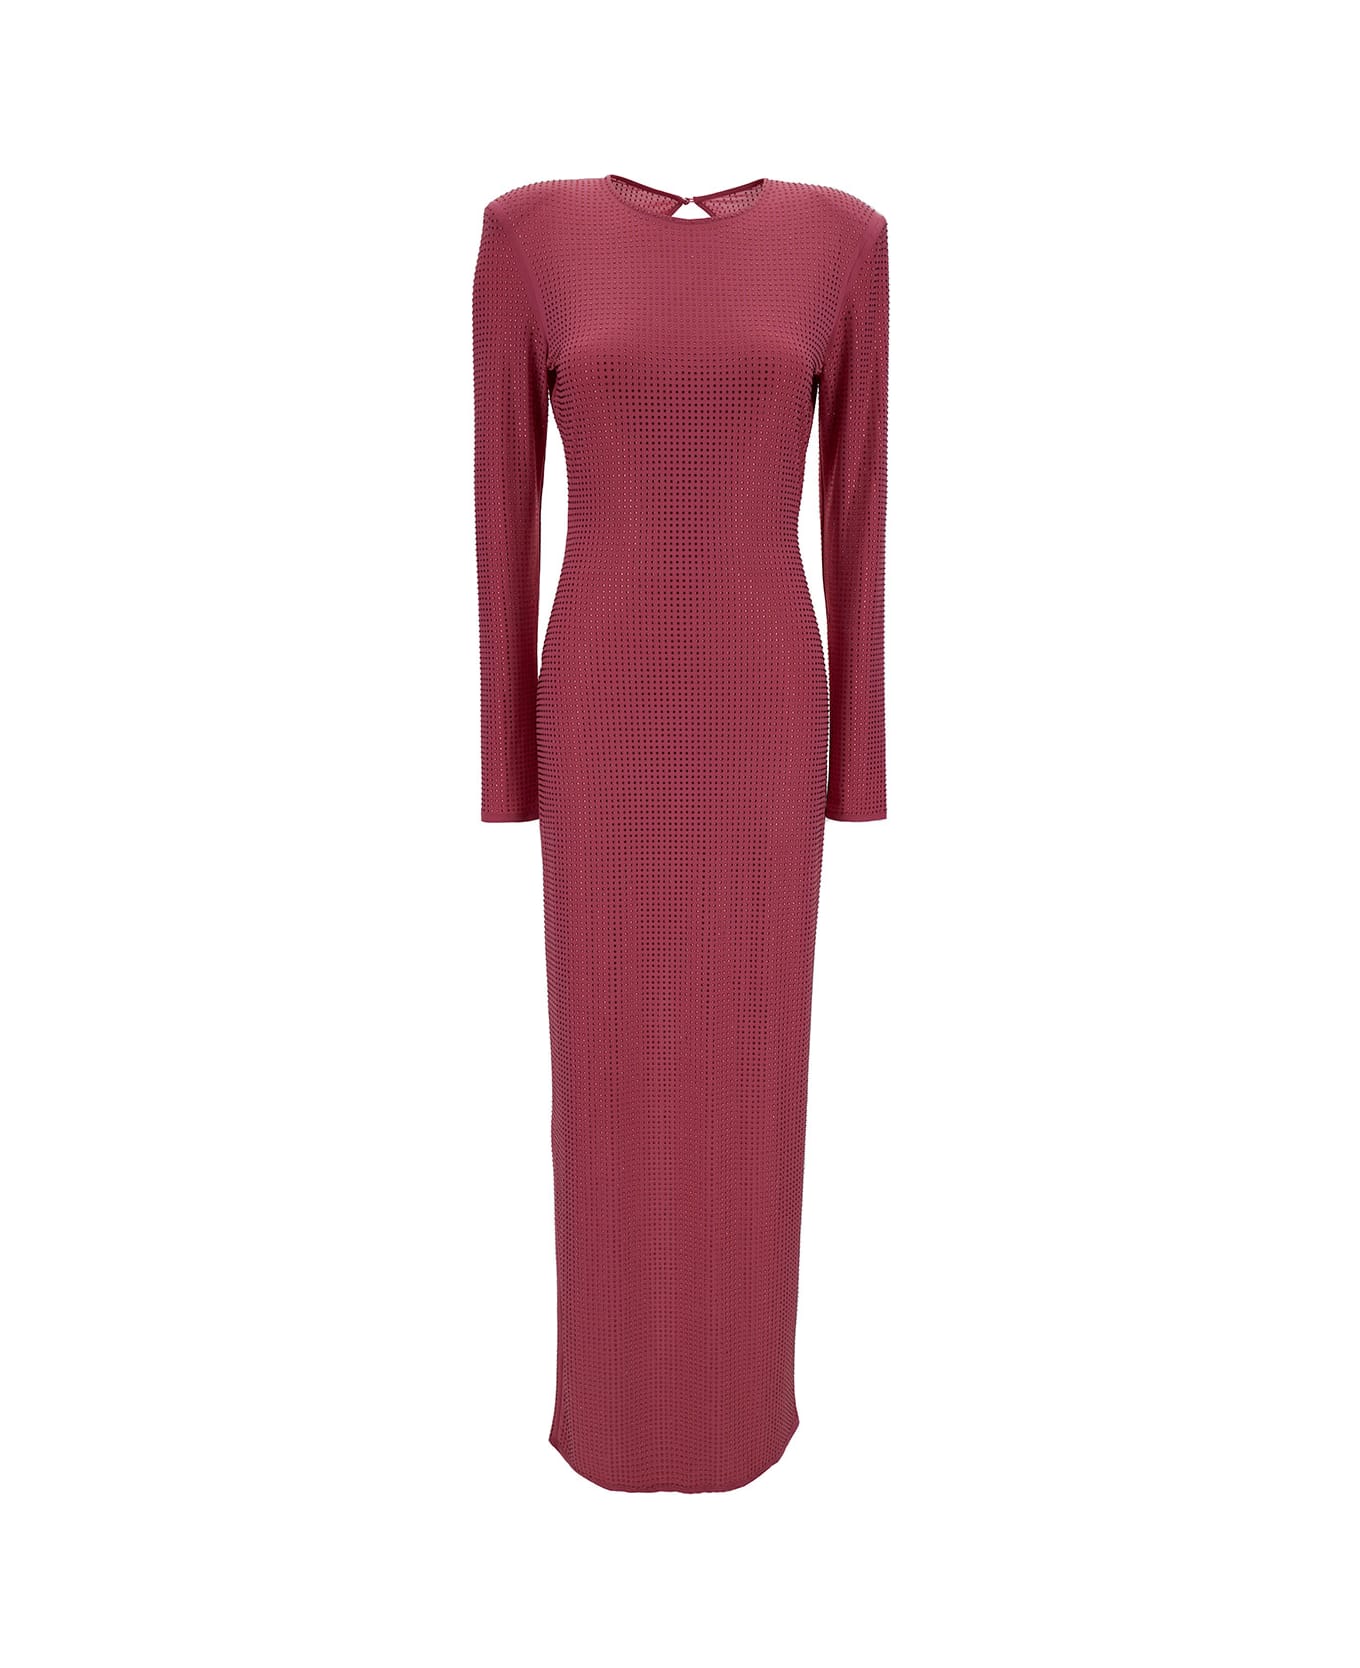 Rotate by Birger Christensen Red Maxi Dress With Rhinestone Embellishment In Stretch Fabric Woman - Rosa